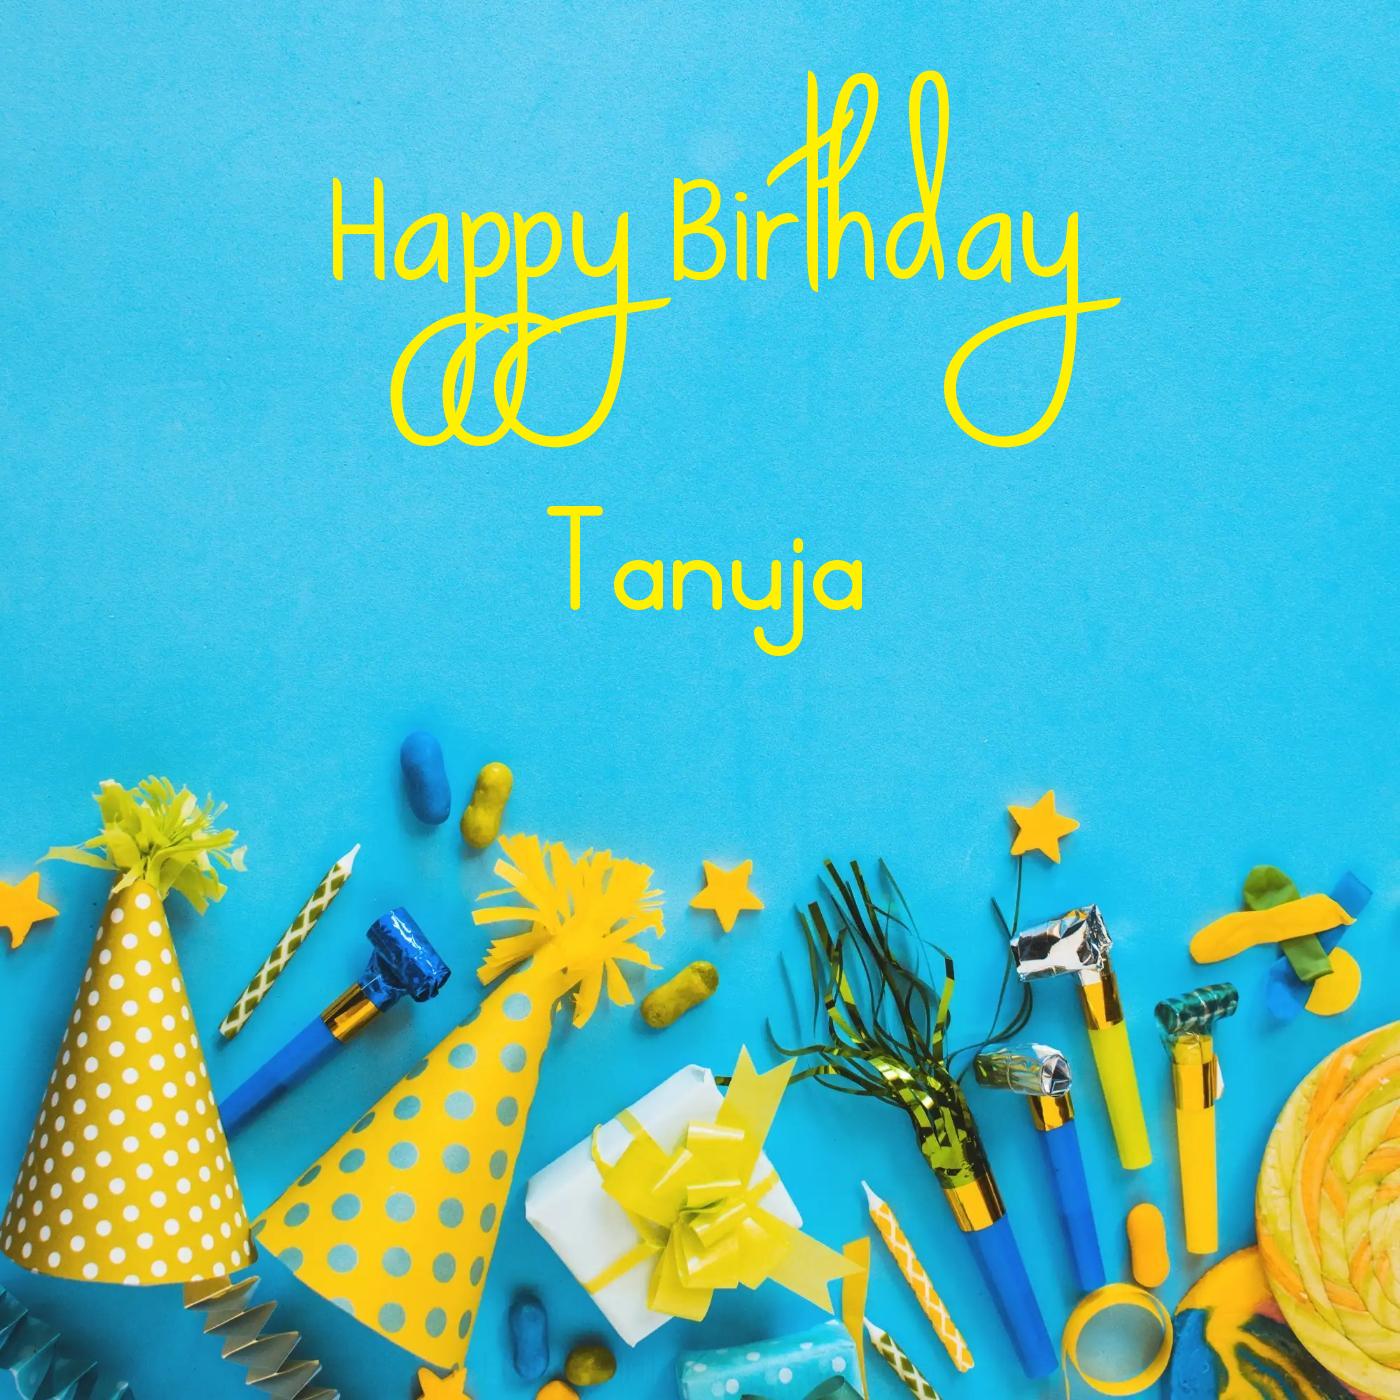 Happy Birthday Tanuja Party Accessories Card